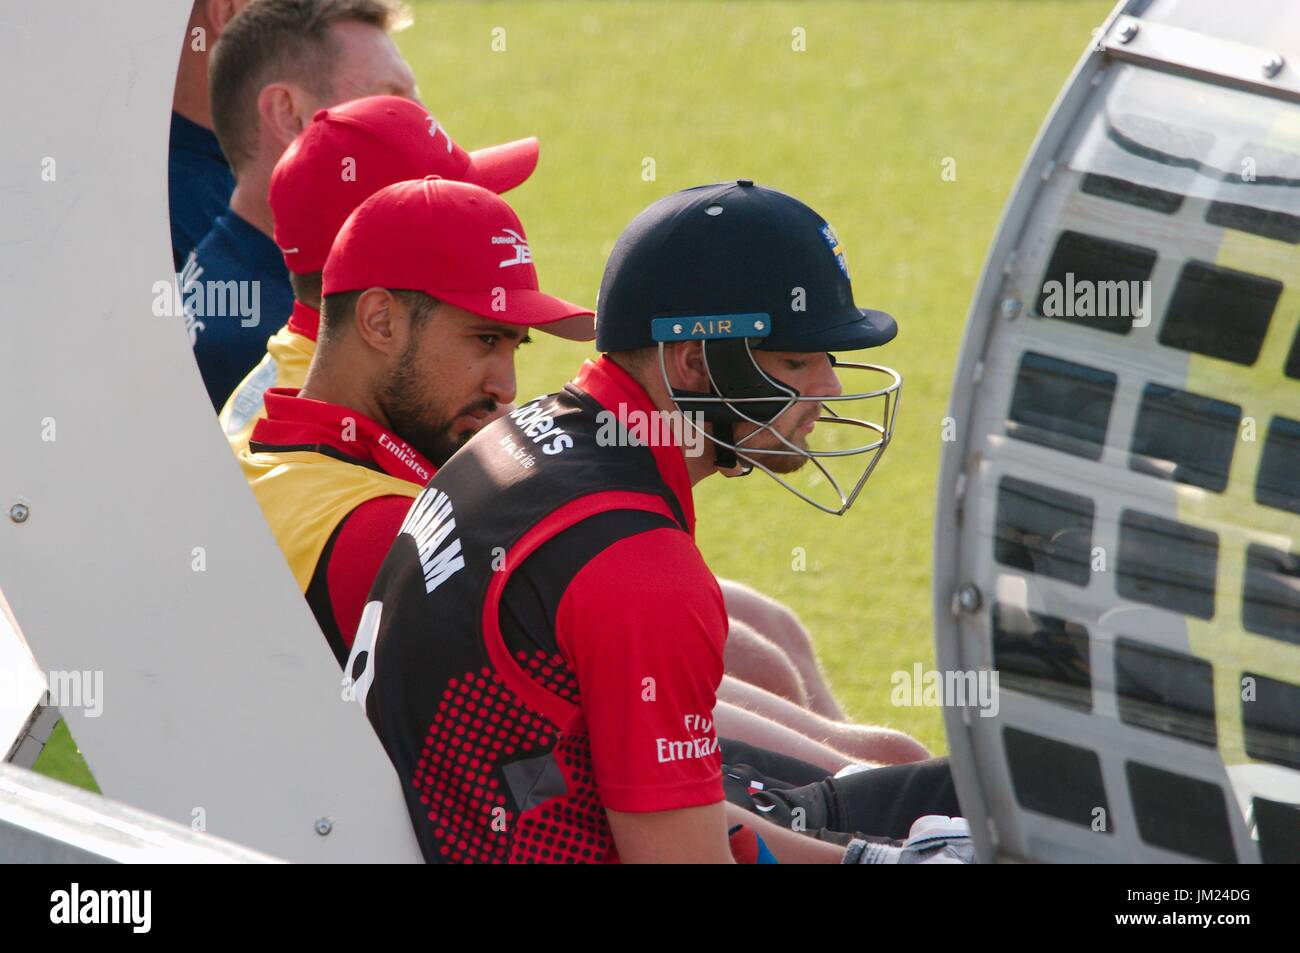 Chester le Street, England, 25th July 2017. Jack Burnham of Durham Jets waiting on the bench for his turn to bat in the NatWest T20 match against Nottinghamshire Outlaws. Credit: Colin Edwards/Alamy Live News. Stock Photo